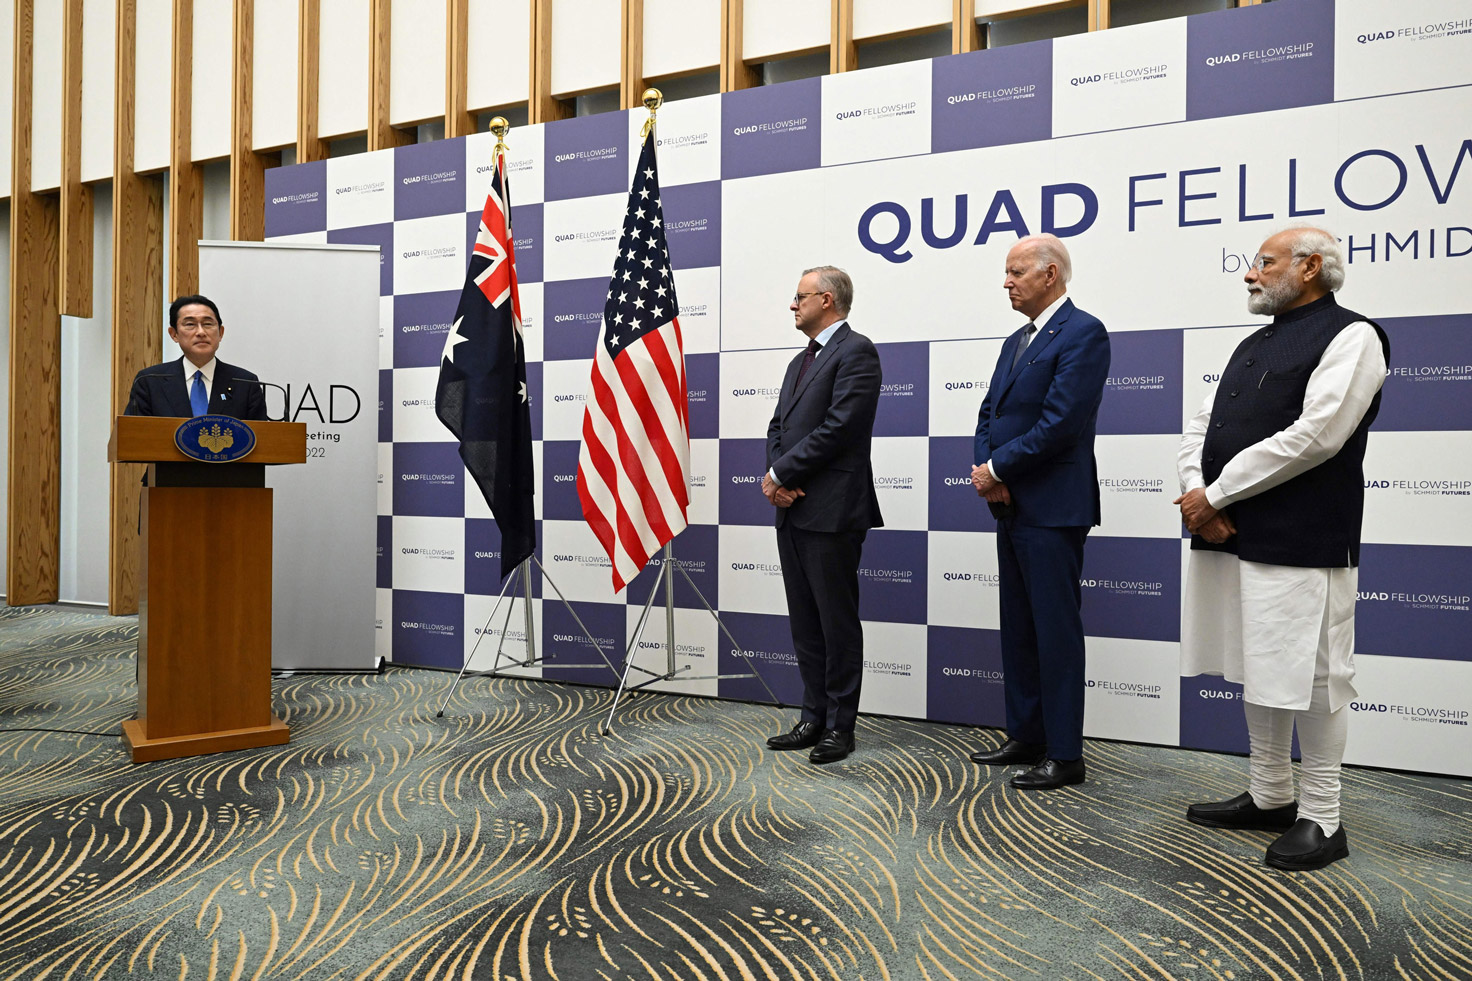 US President Joe Biden, Indian Prime Minister Narendra Modi and Australian Prime Minister Anthony Albanese listen to Japanese Prime Minister Fumio Kishida announce the Quad Fellowship, during the Quad Leaders Summit in Tokyo, on Tuesday.